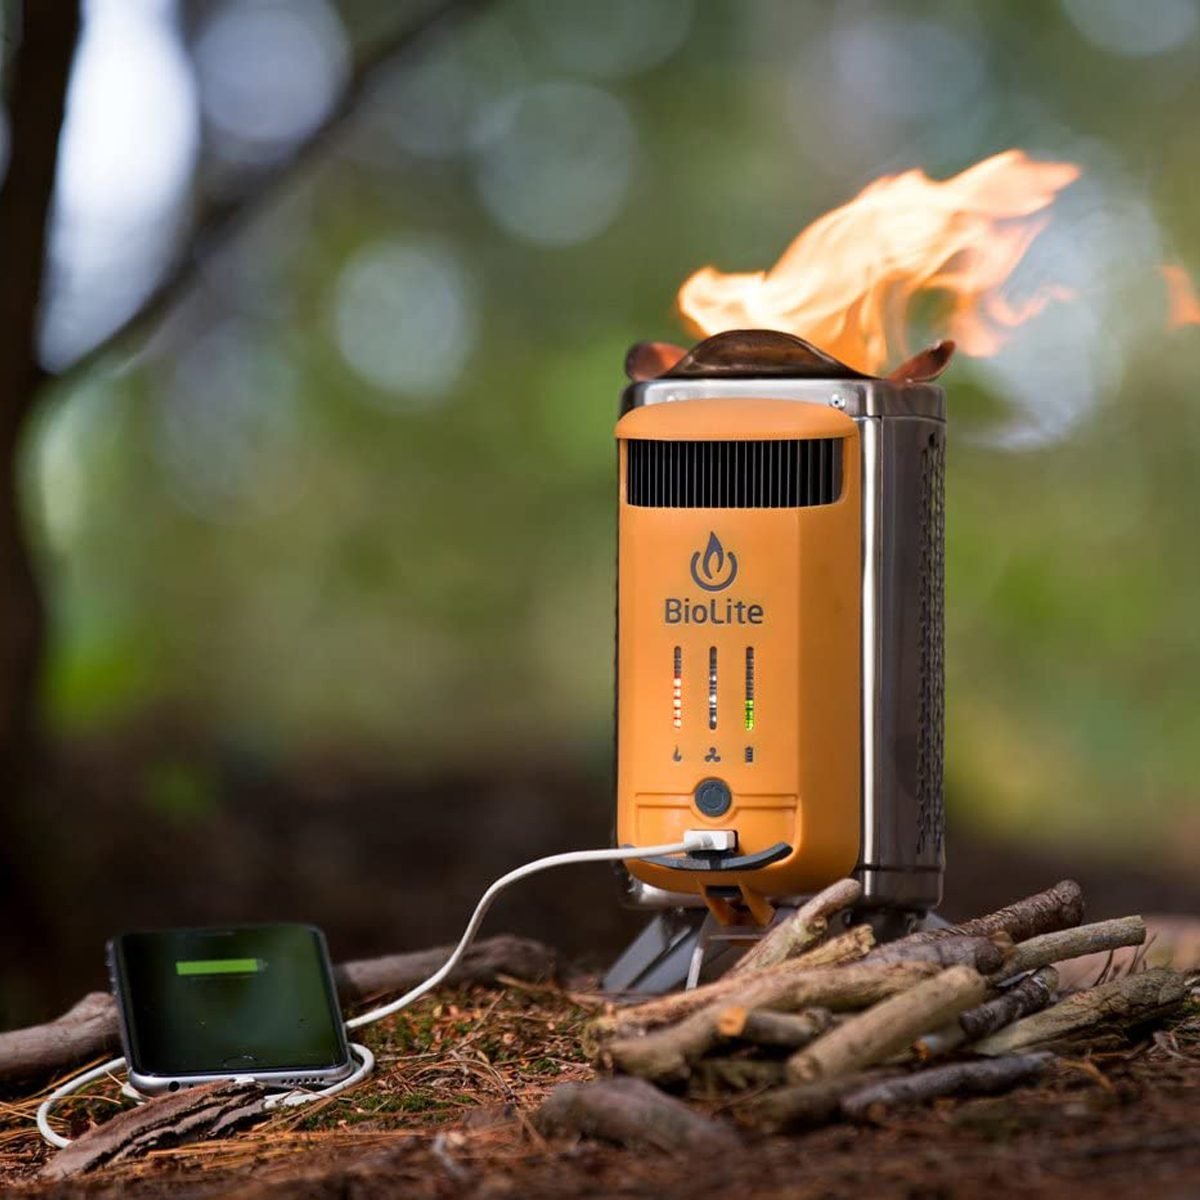 10 Cool Camping Gadgets You Need This Summer